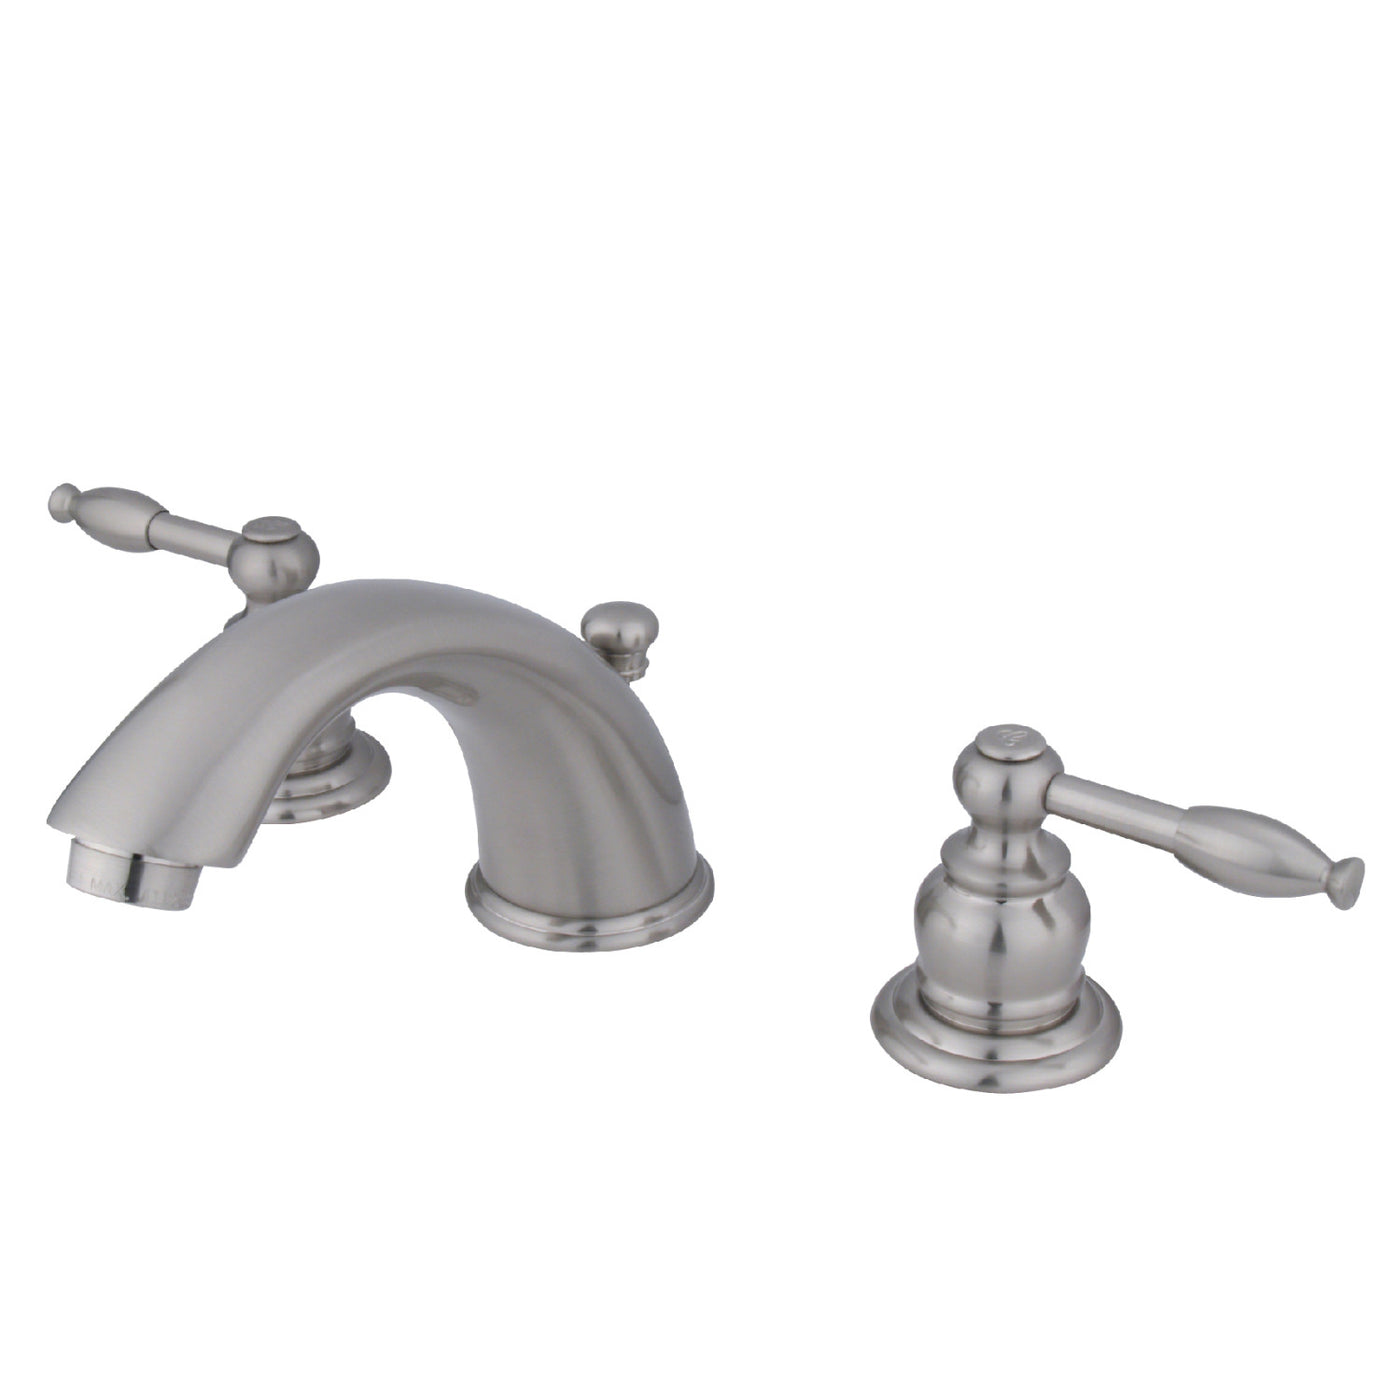 Elements of Design EB968KL Widespread Bathroom Faucet with Retail Pop-Up, Brushed Nickel